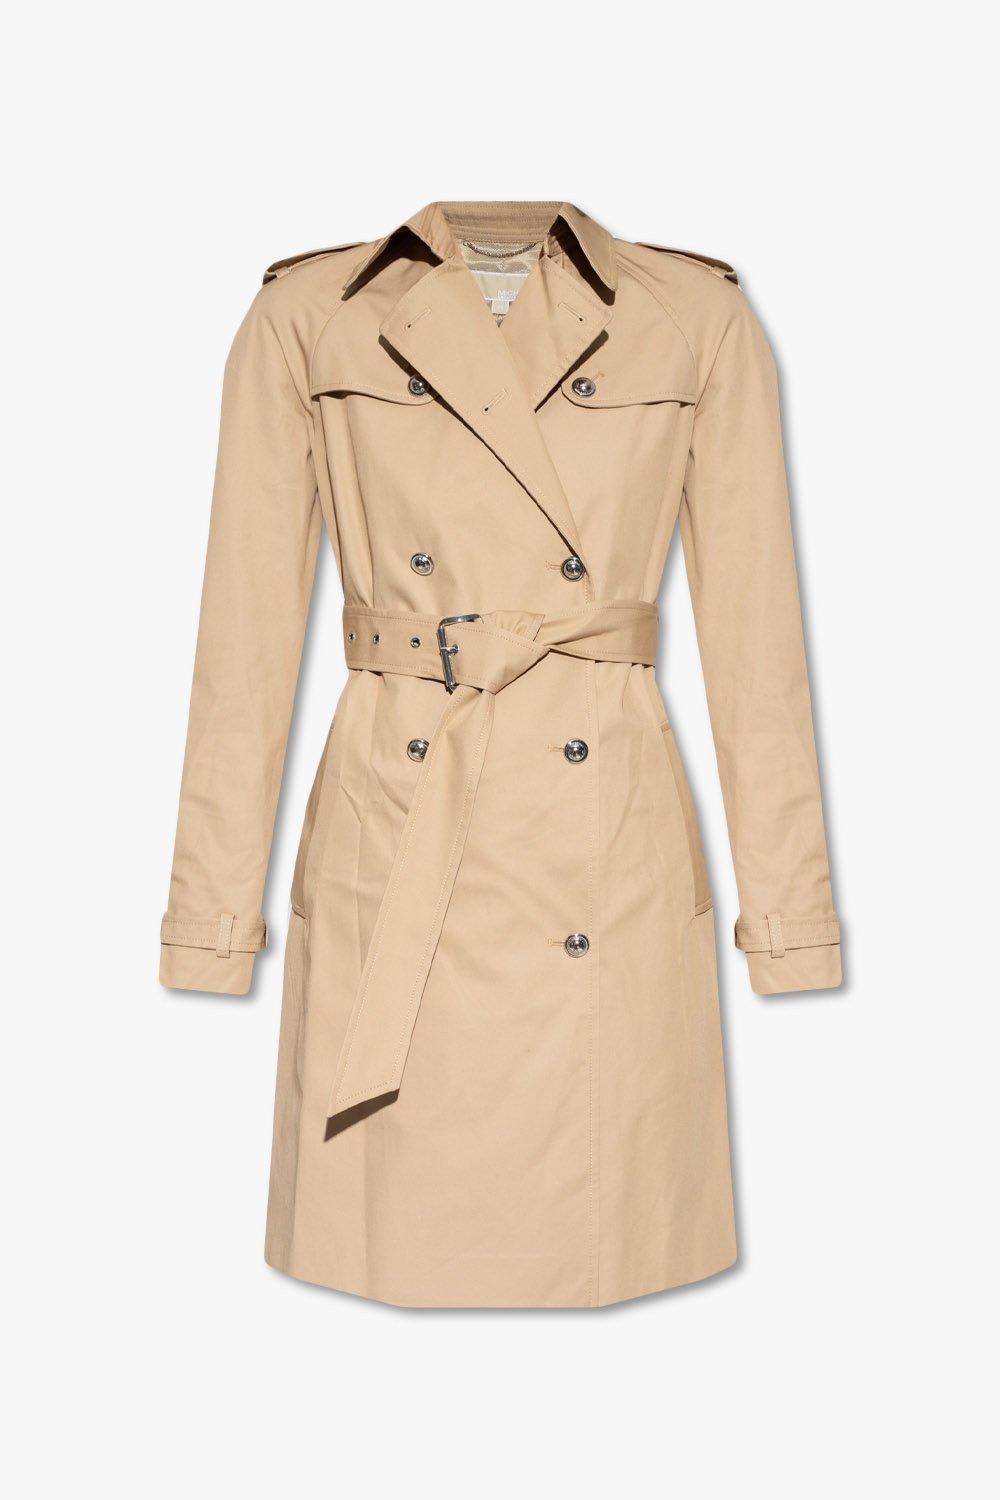 MICHAEL KORS DOUBLE BREASTED TRENCH COAT